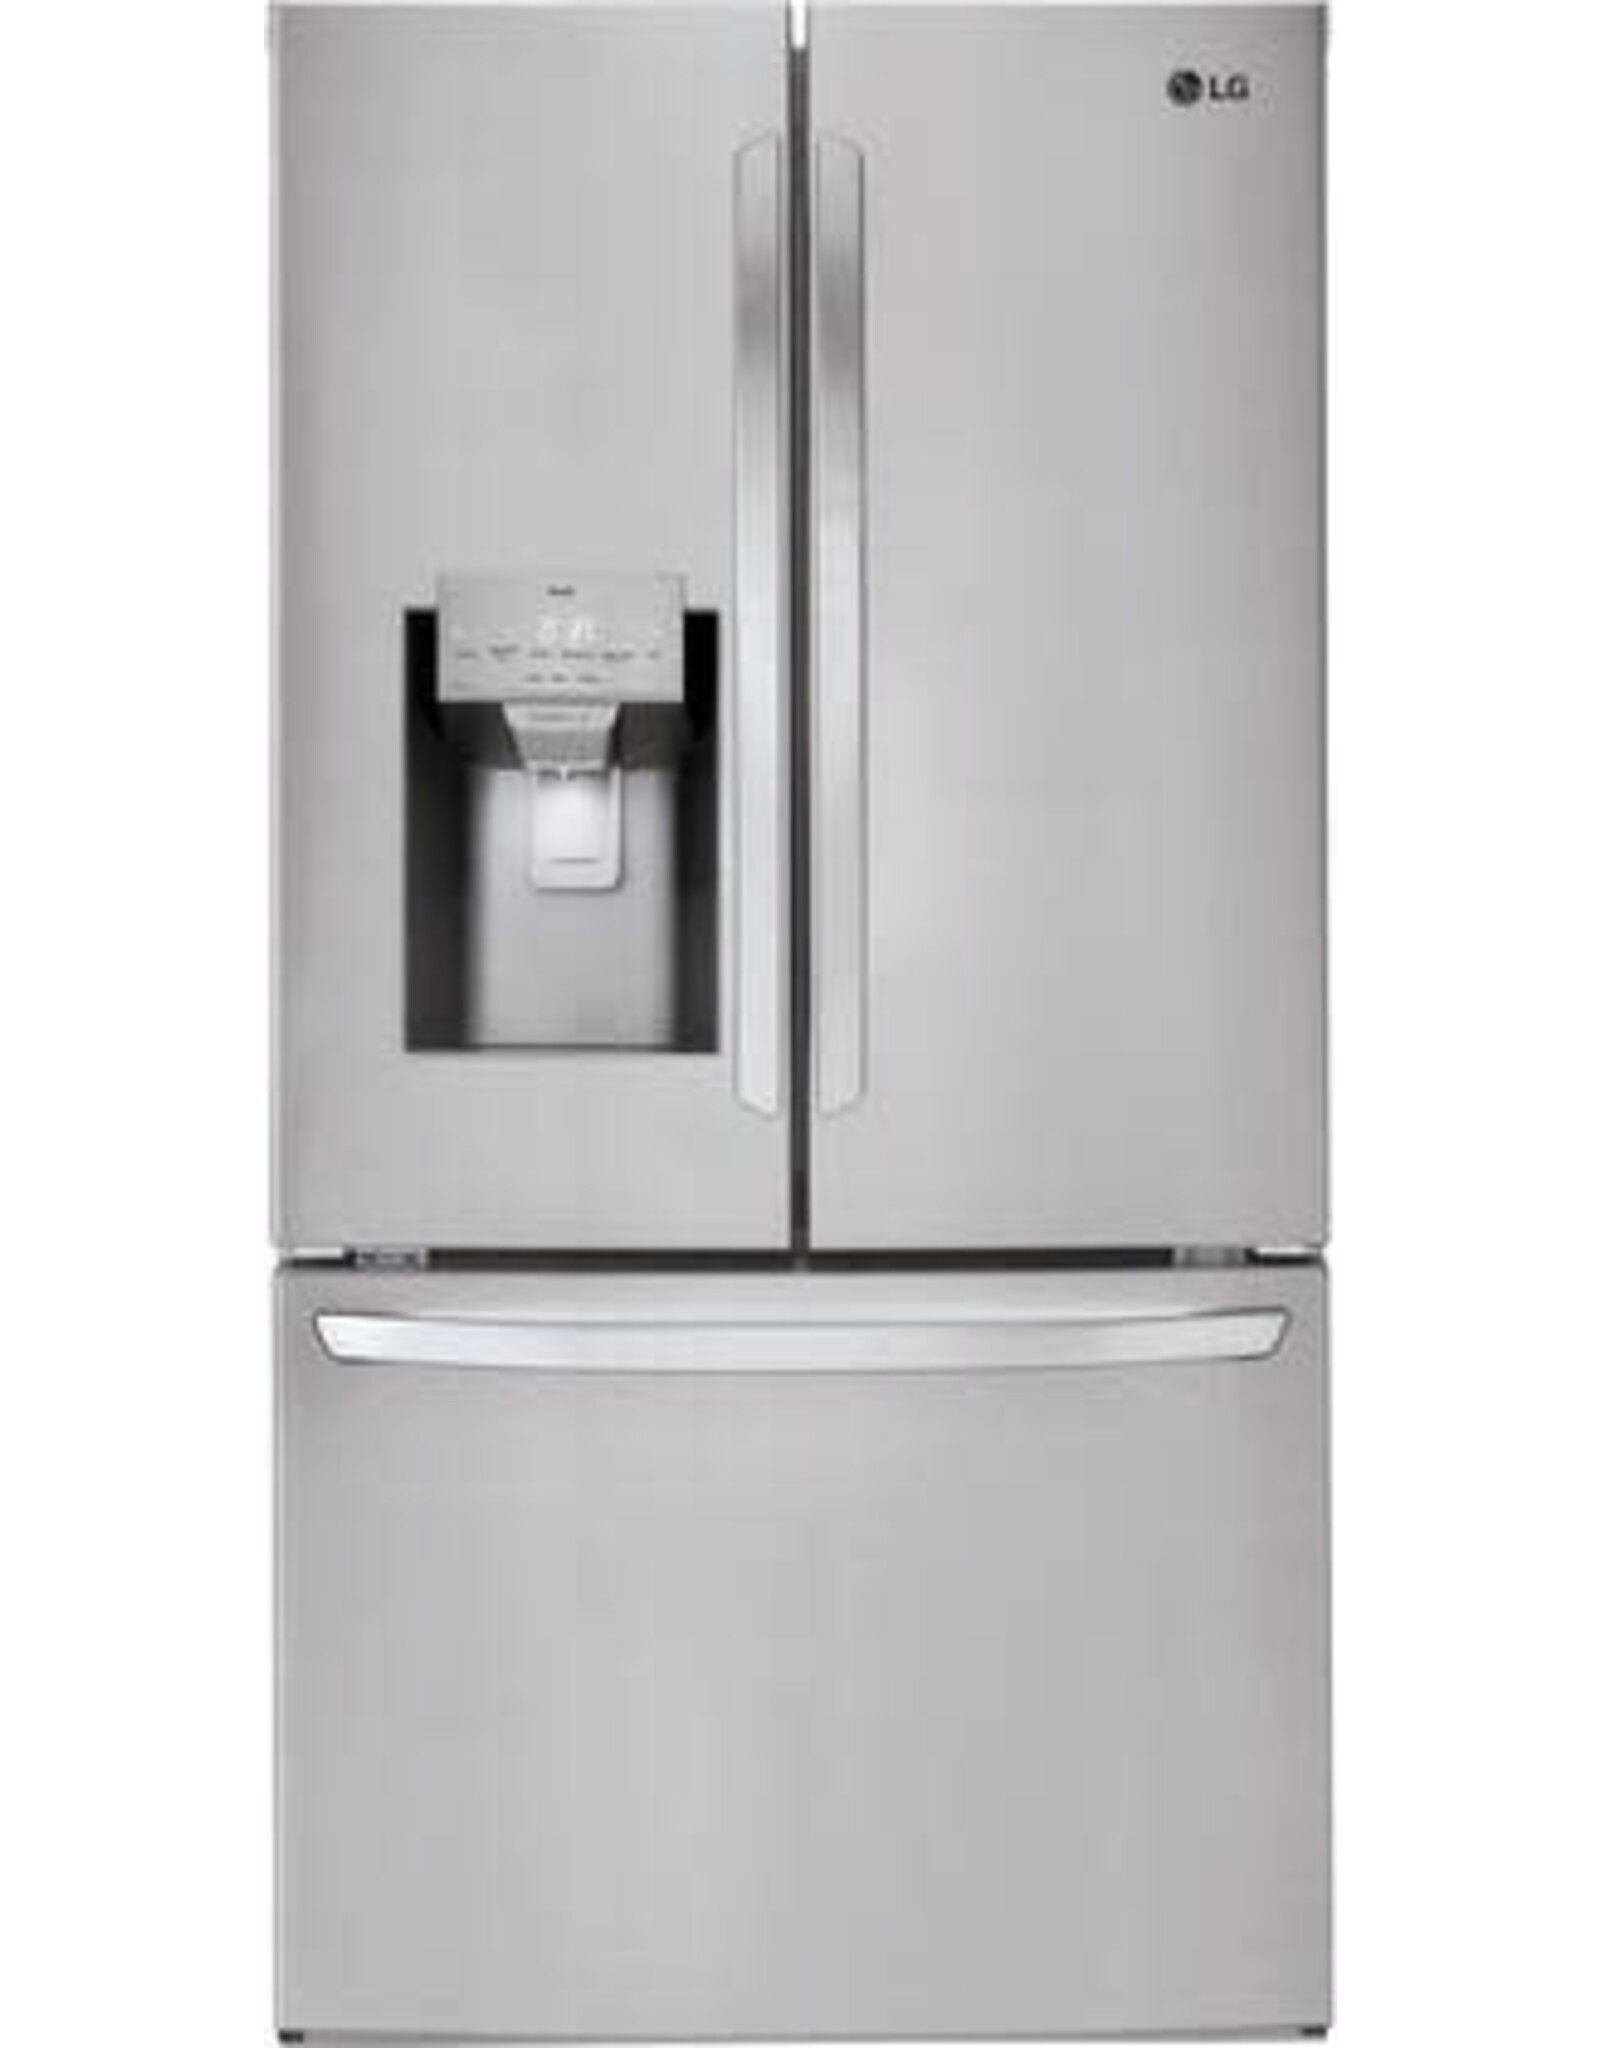 LRFS28XBS 28 cu. ft. 3 Door French Door Refrigerator with Ice and Water with Single Ice in Stainless Standard Depth